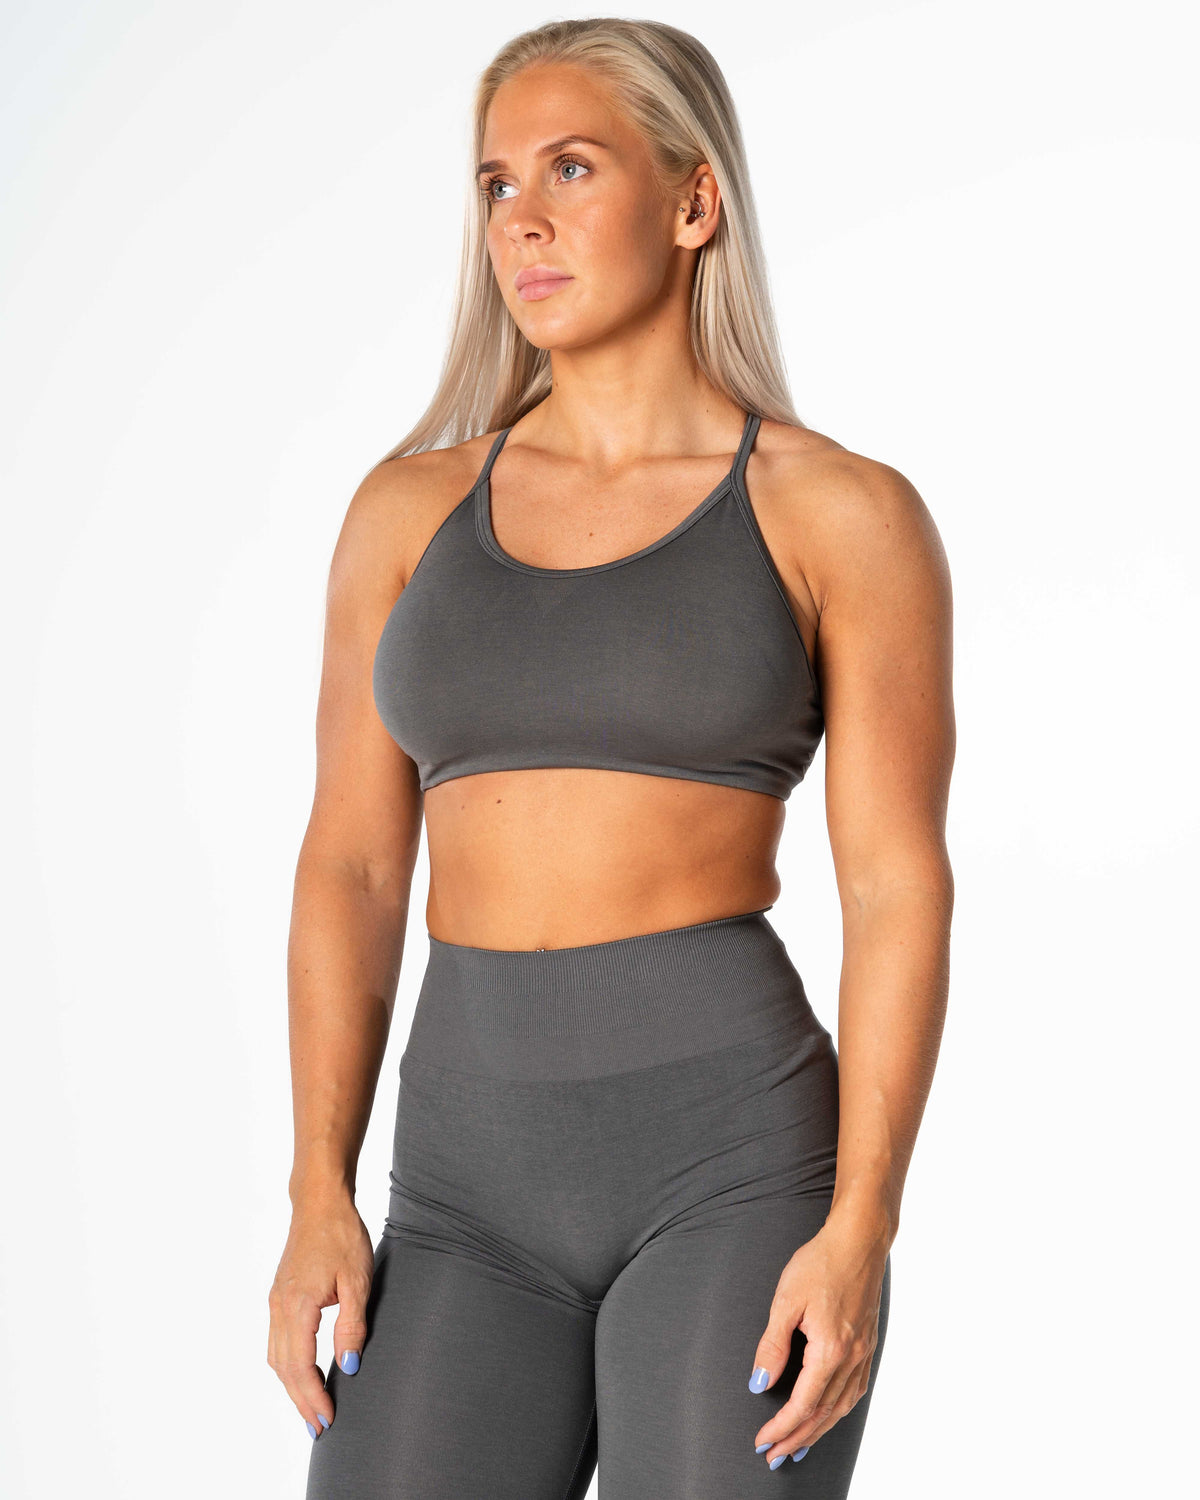 RISE - Seamless collection in trendy colors - RELODE